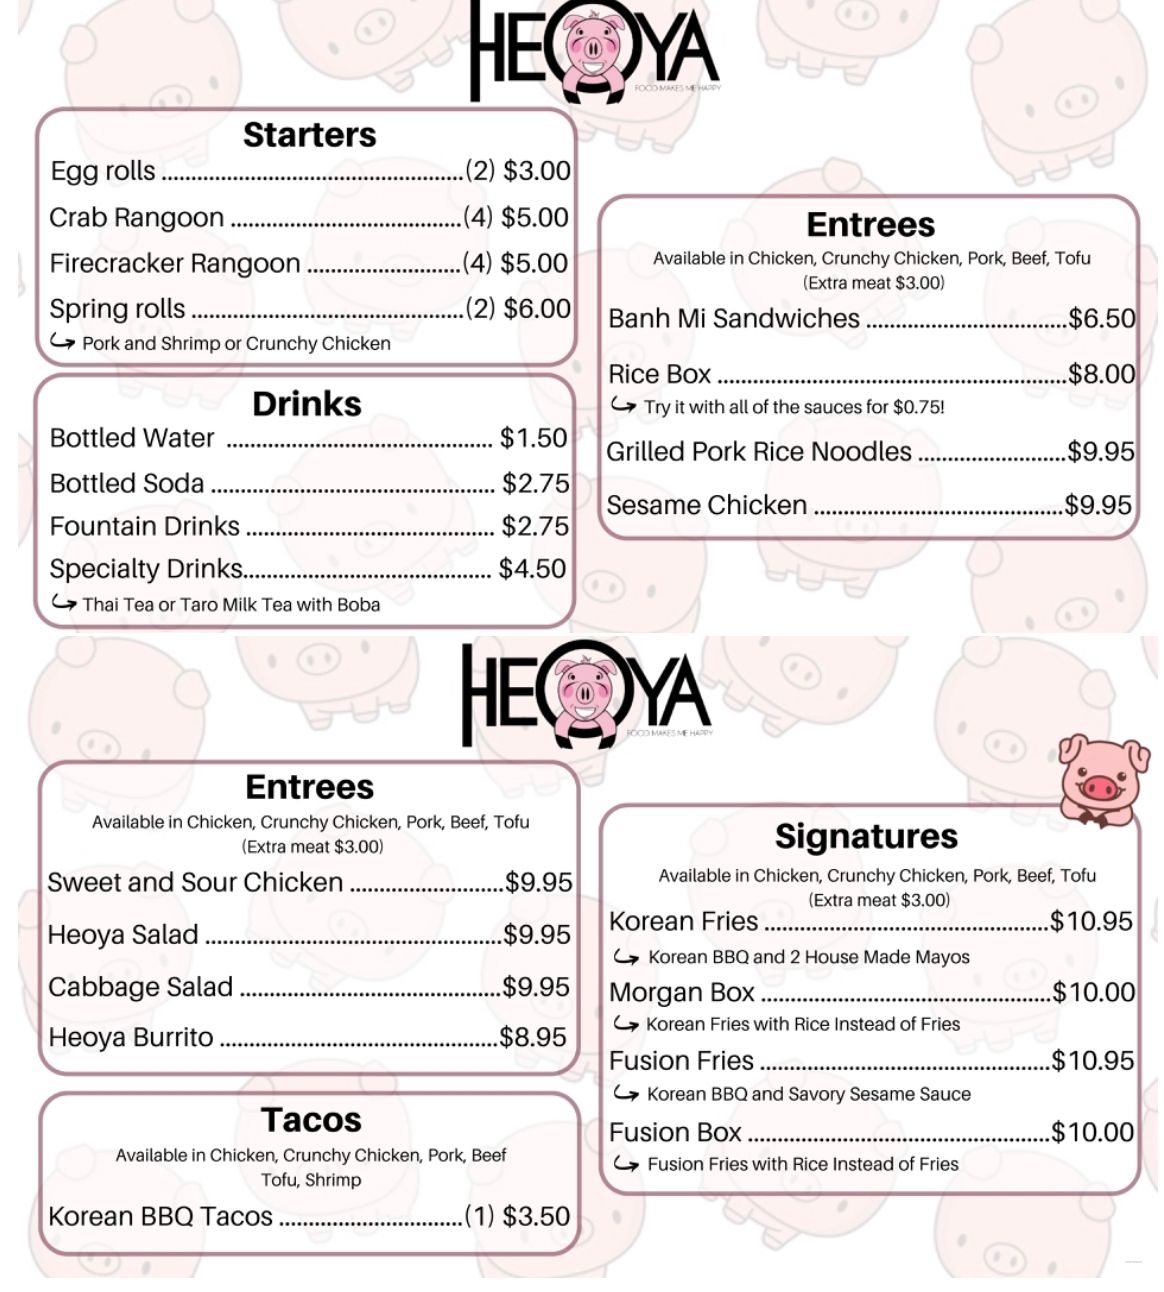 Heoya Aisan Fusion Restaruant - Full Menu With Prices - 402-742-8088 -  3280 Superior St, Lincoln, NE 68504 - Order Online - City-Wide Delivery - Metro Dining Delivery
  www.Facebook.com/heoya1
Email: Heoyasubs@gmail.com
33rd & Superior: (402) 742-8088
Food Truck: (402) 429-2078

STARTERS
Egg Rolls		(2)	$2.50
Crab Ragoon		(4)	$3.00
Firecracker Rangoons		(4)	$3.25
Spring Rolls		(2) 	$4.50
Soup of the Day		 	$1.95
Fries				$6.95
TACOS
Korean BBQ Tacos 		(1)	$2.50
**Chicken, Pork, Beef, Crunchy Chicken or Tofu
Fish or Shrimp Taco		(1)	$2.75
Chicken Wheat Taco		(1)	$4.75
ENTREES
Heoya Rice Box (Chicken, Pork, Beef or Tofu)			$5.50
Banh Mi/Sandwiches (Chicken, Pork, Beef or Tofu)			$4.75
Seasame Soy Tilapia			$7.25
Grilled Pork Rice Noodles w/Egg Rolls			$6.95
SALADS
Asian Chicken Cabbage			$6.95
Heoya Salad (Beef, Chicken, Pork or Tofu)			$6.95
DINNER MENU
Available after 4 PM Monday-Friday and all day Saturday 
*Choice of Chicken, Pork or Tofu for $6.95 Beef for $7.45 or Shrimp for $7.95
	•Curry	•Sweet & Sour	•Sesame
	•Mongolian	•Kung Pao	•Lo Mein
Basil Chicken			$7.25
Three-Cups Chicken			$7.25
Stir Fry Beef Noodles w/Egg Rolls			$7.25
  